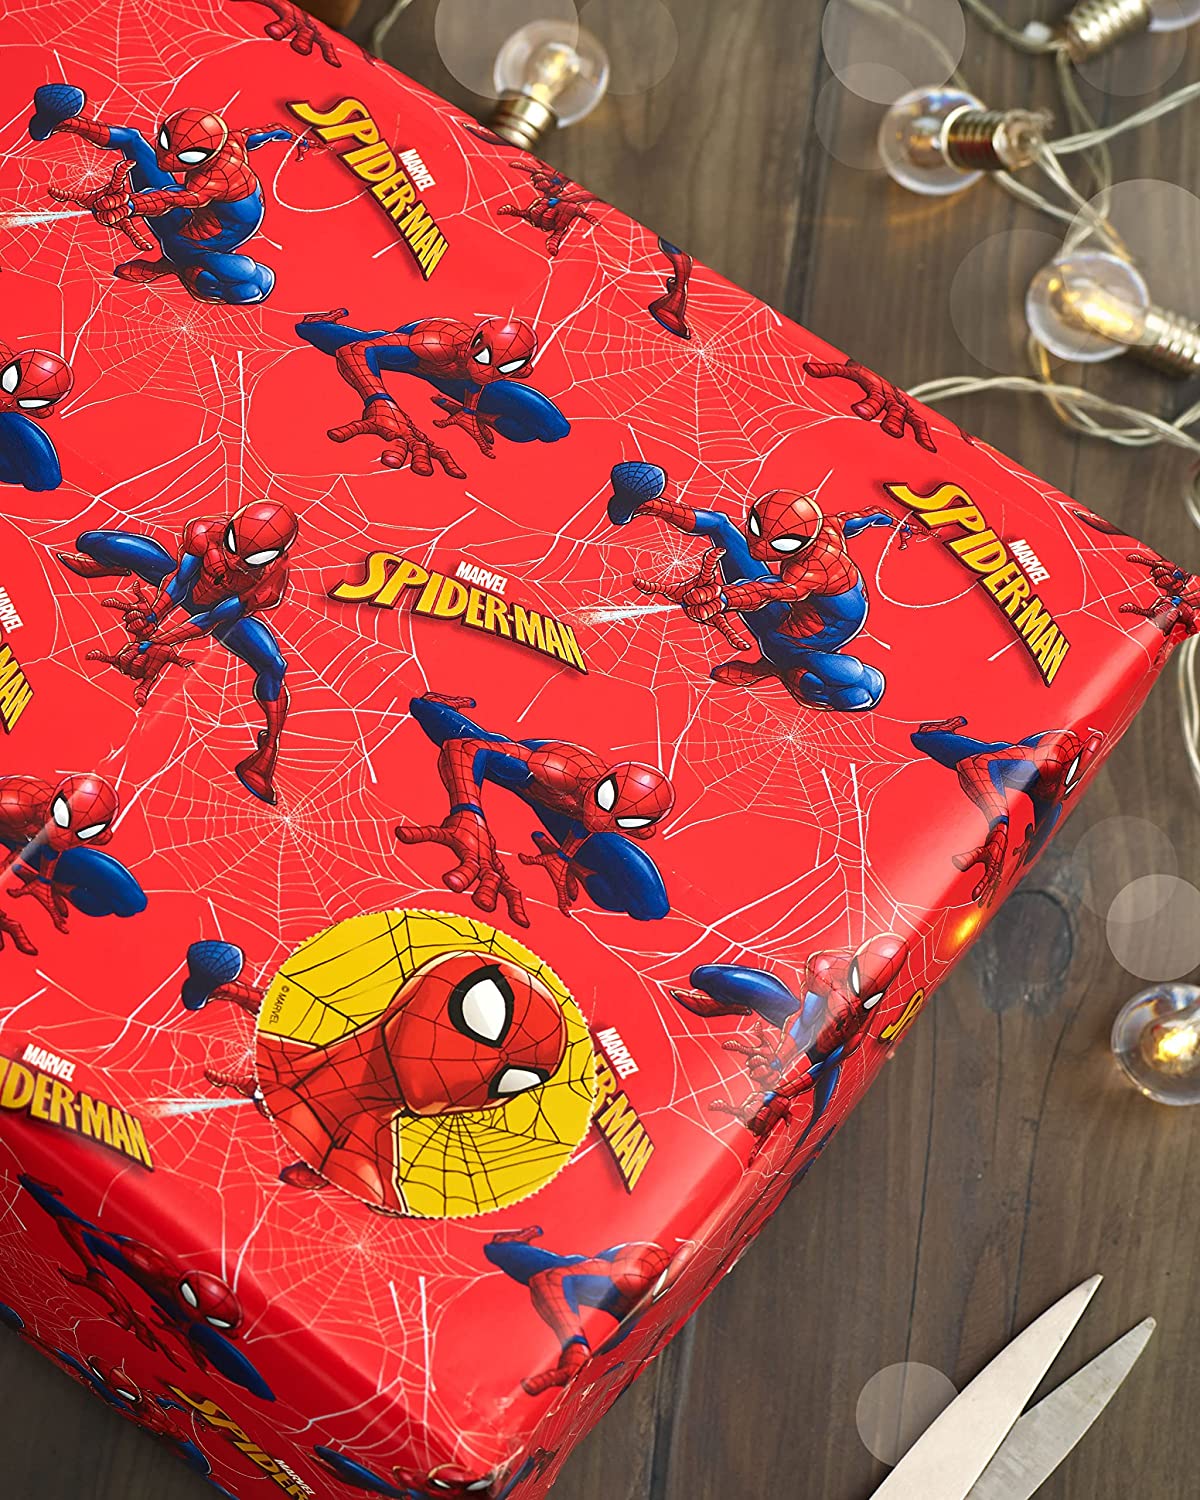 Spiderman Packaged Wrap Birthday Wrapping Paper 2 Sheets and 2 Tags